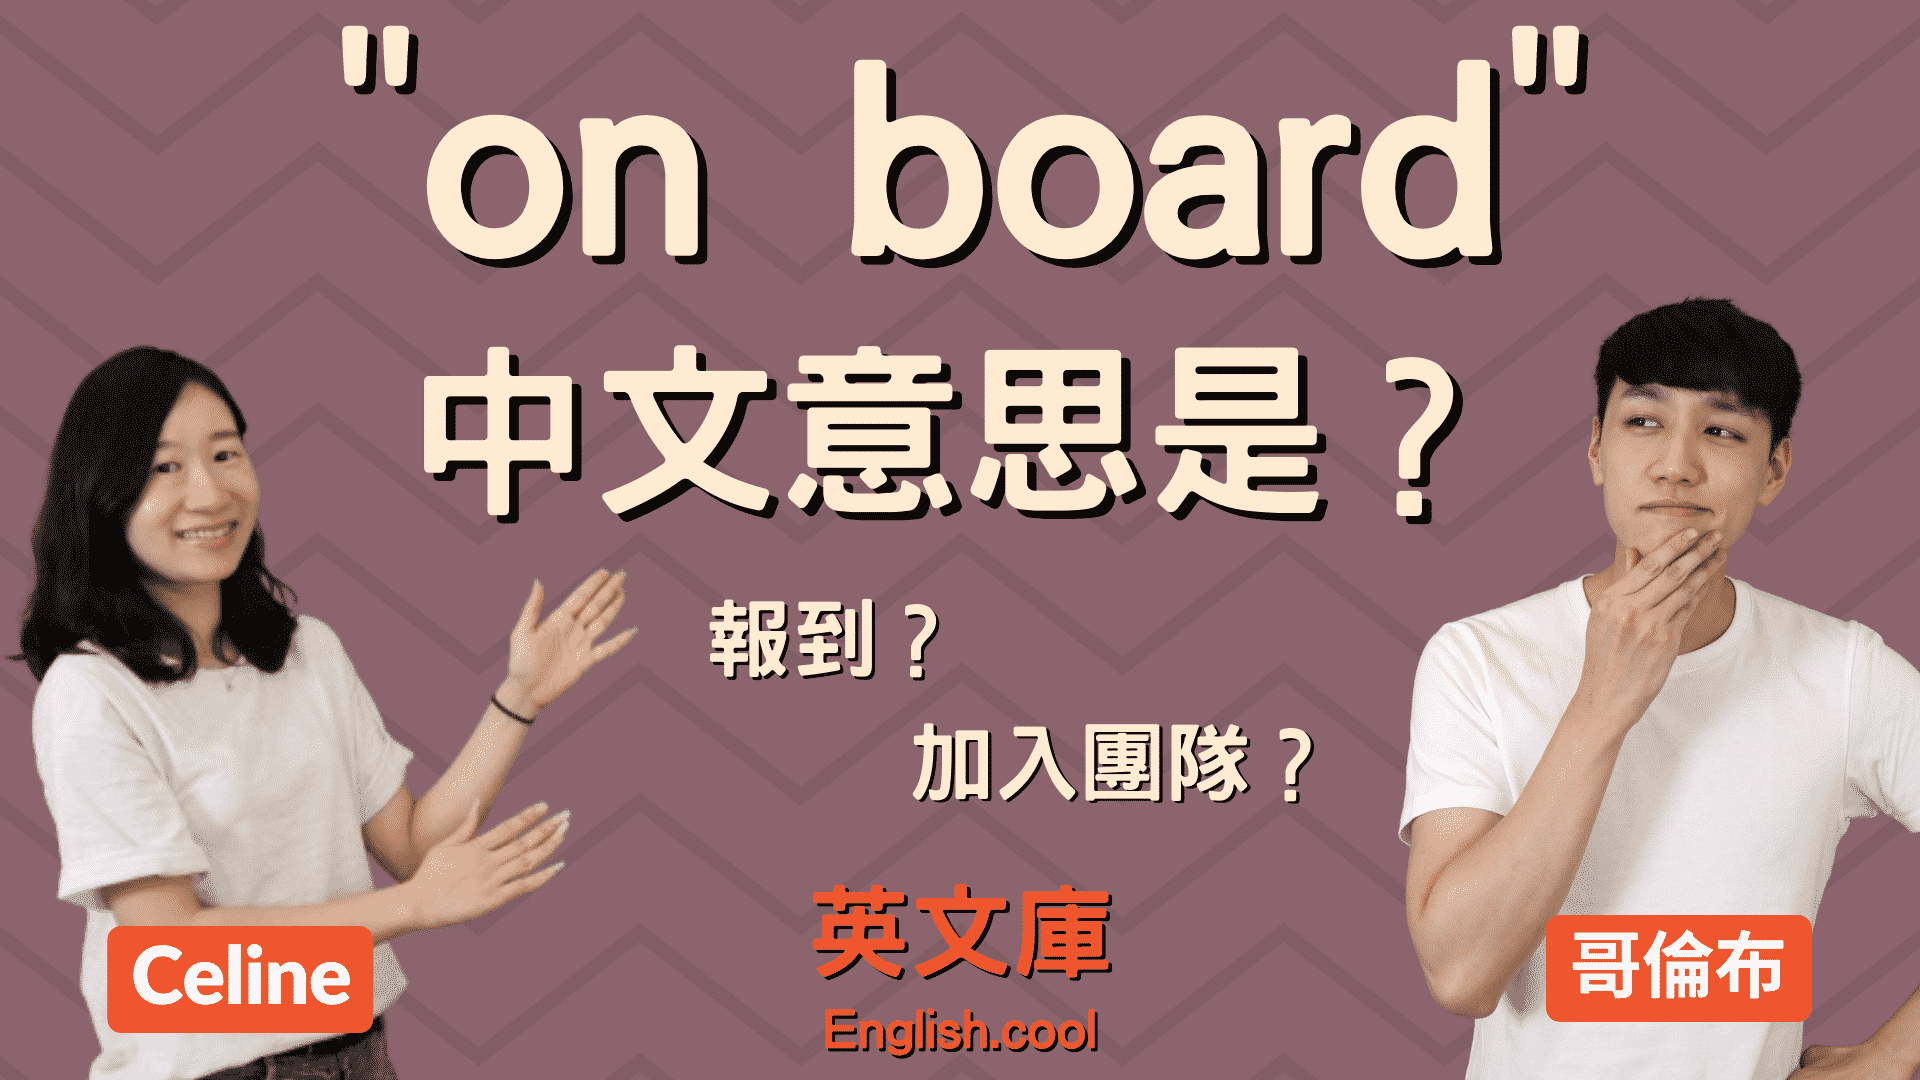 You are currently viewing 「on board」是什麼意思？報到？加入團隊？